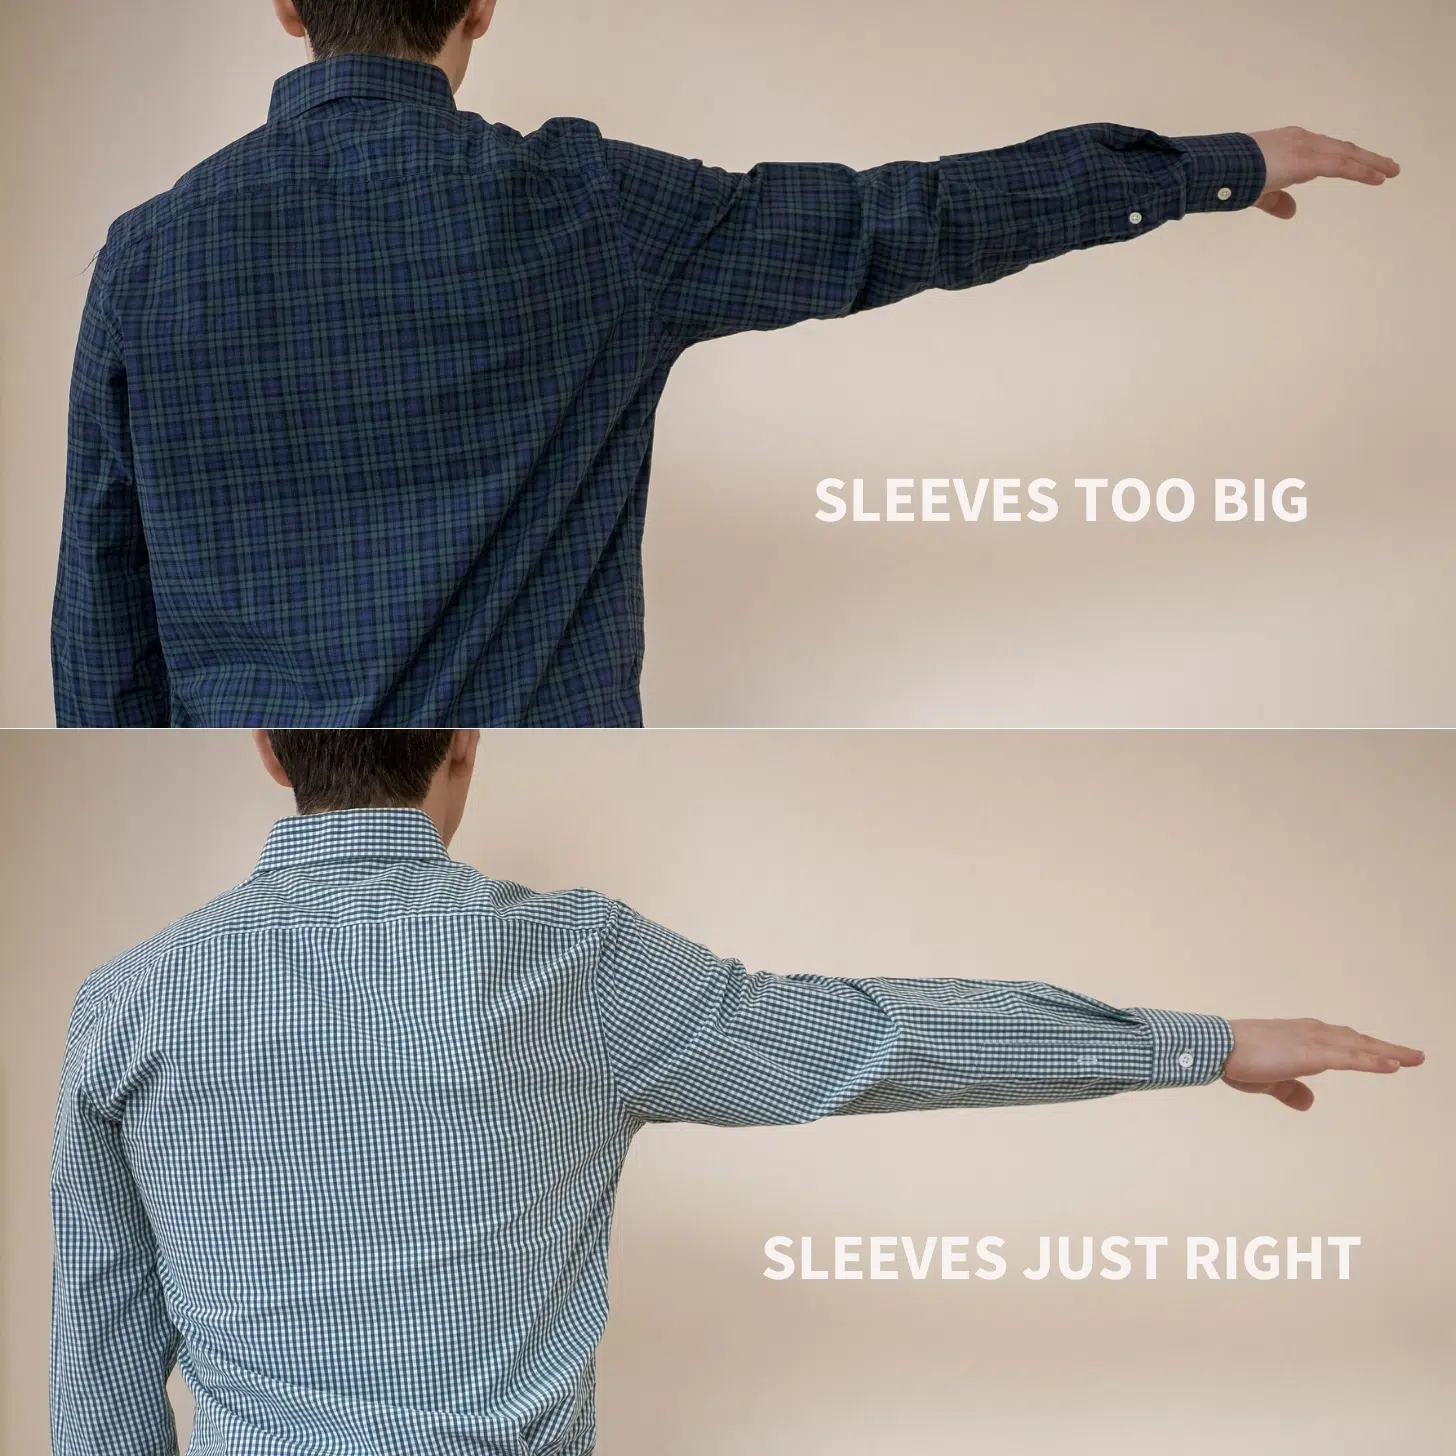 Baggy vs fitted sleeves